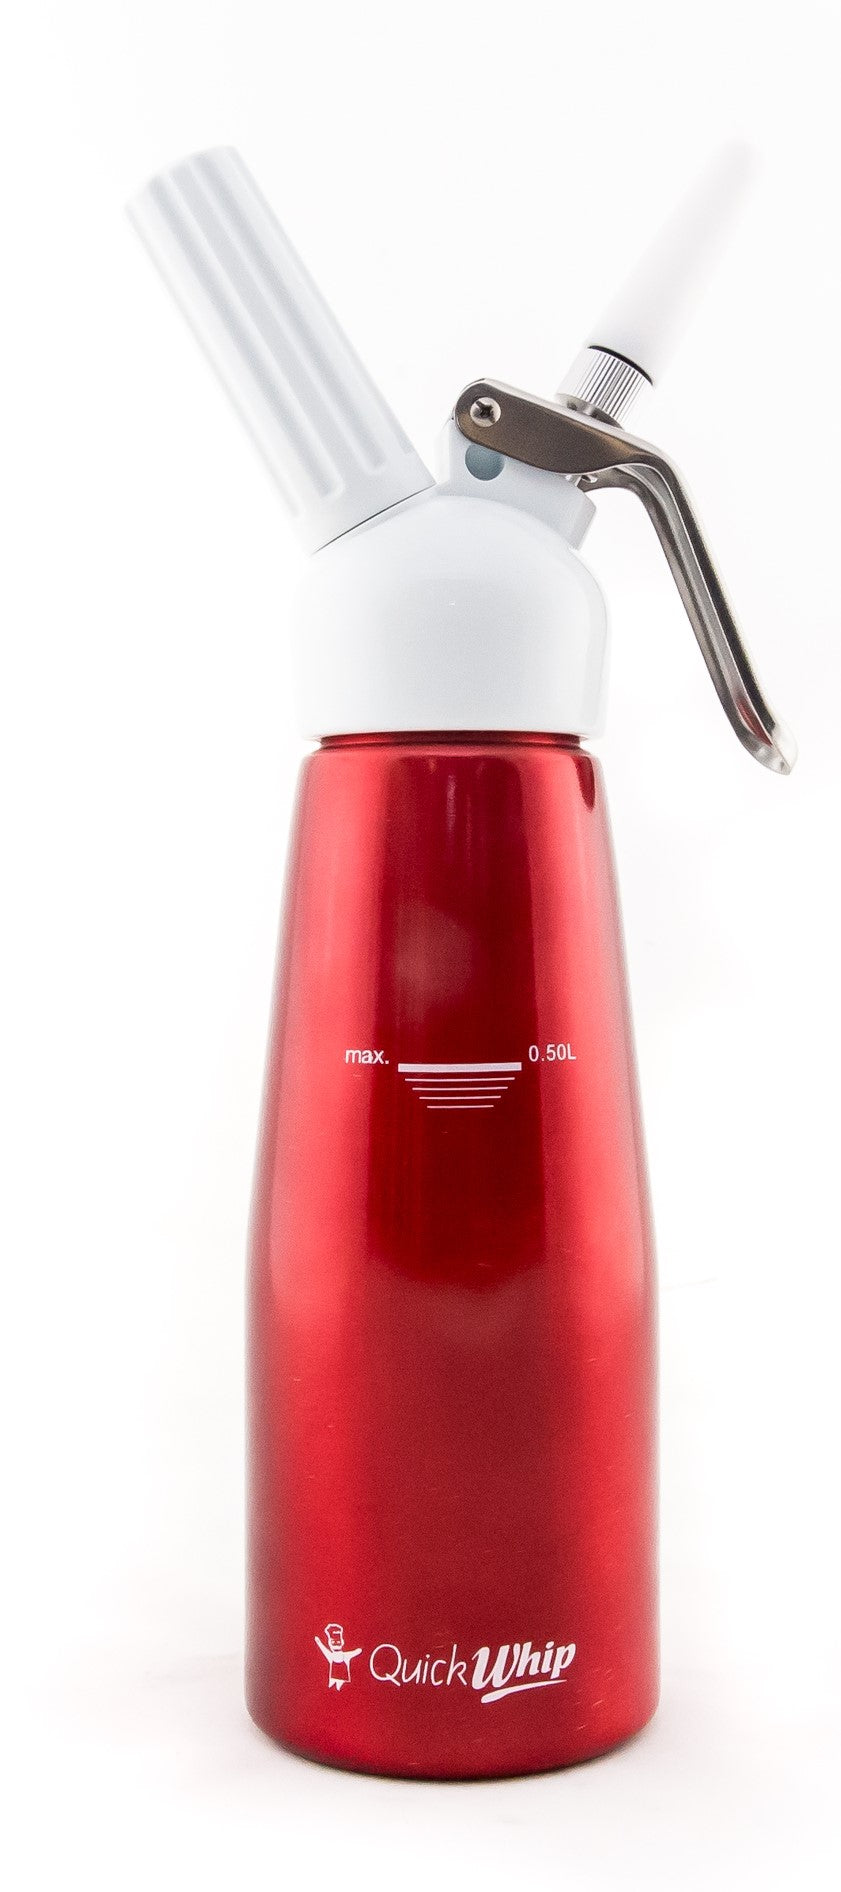 Shop Whipped Cream Chargers and 0.5L Cream Whipper Dispenser